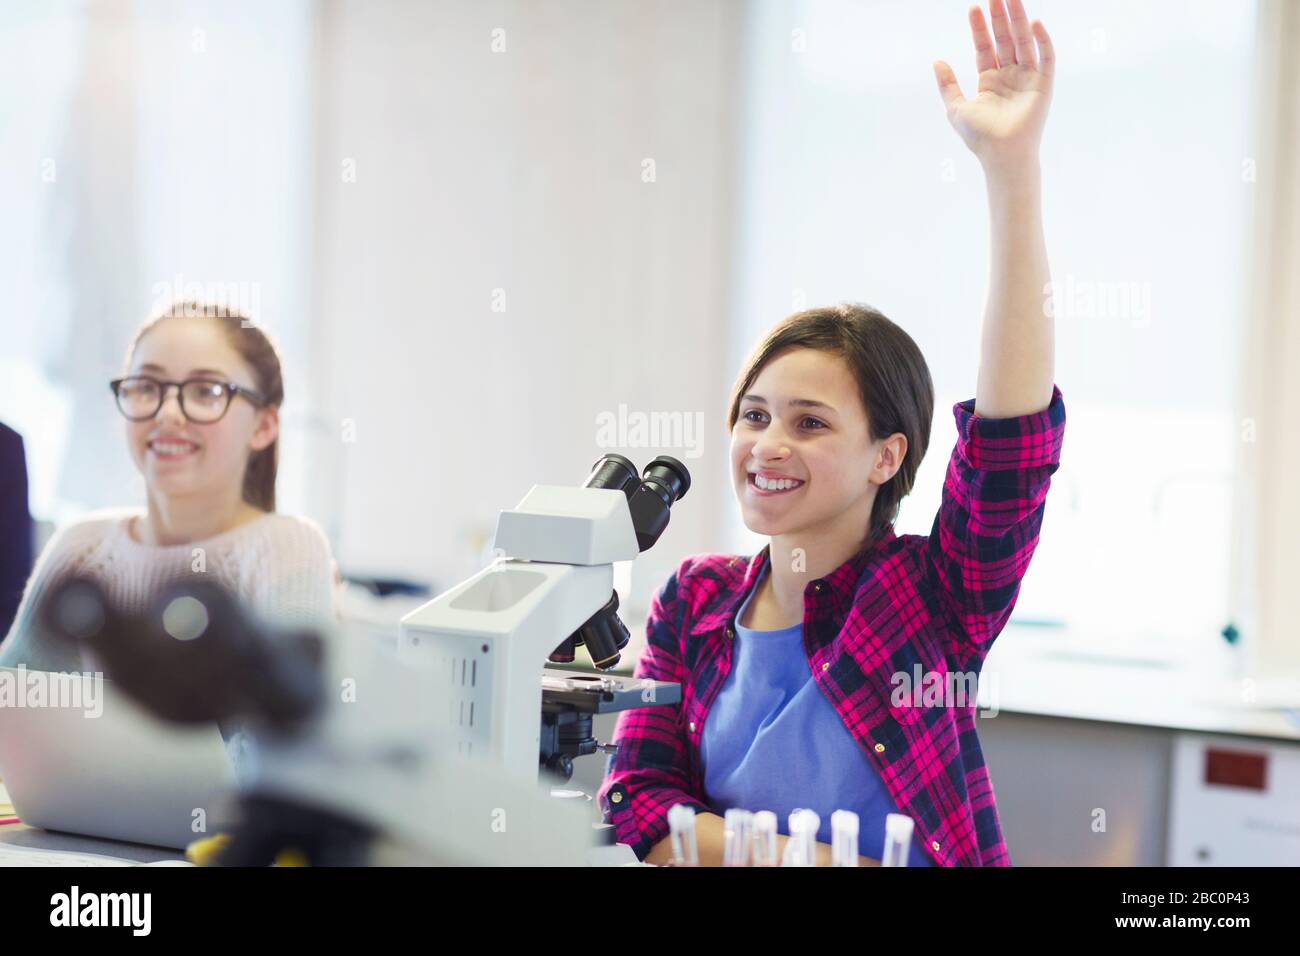 Smiling girl student asking a question behind microscope in classroom laboratory Stock Photo